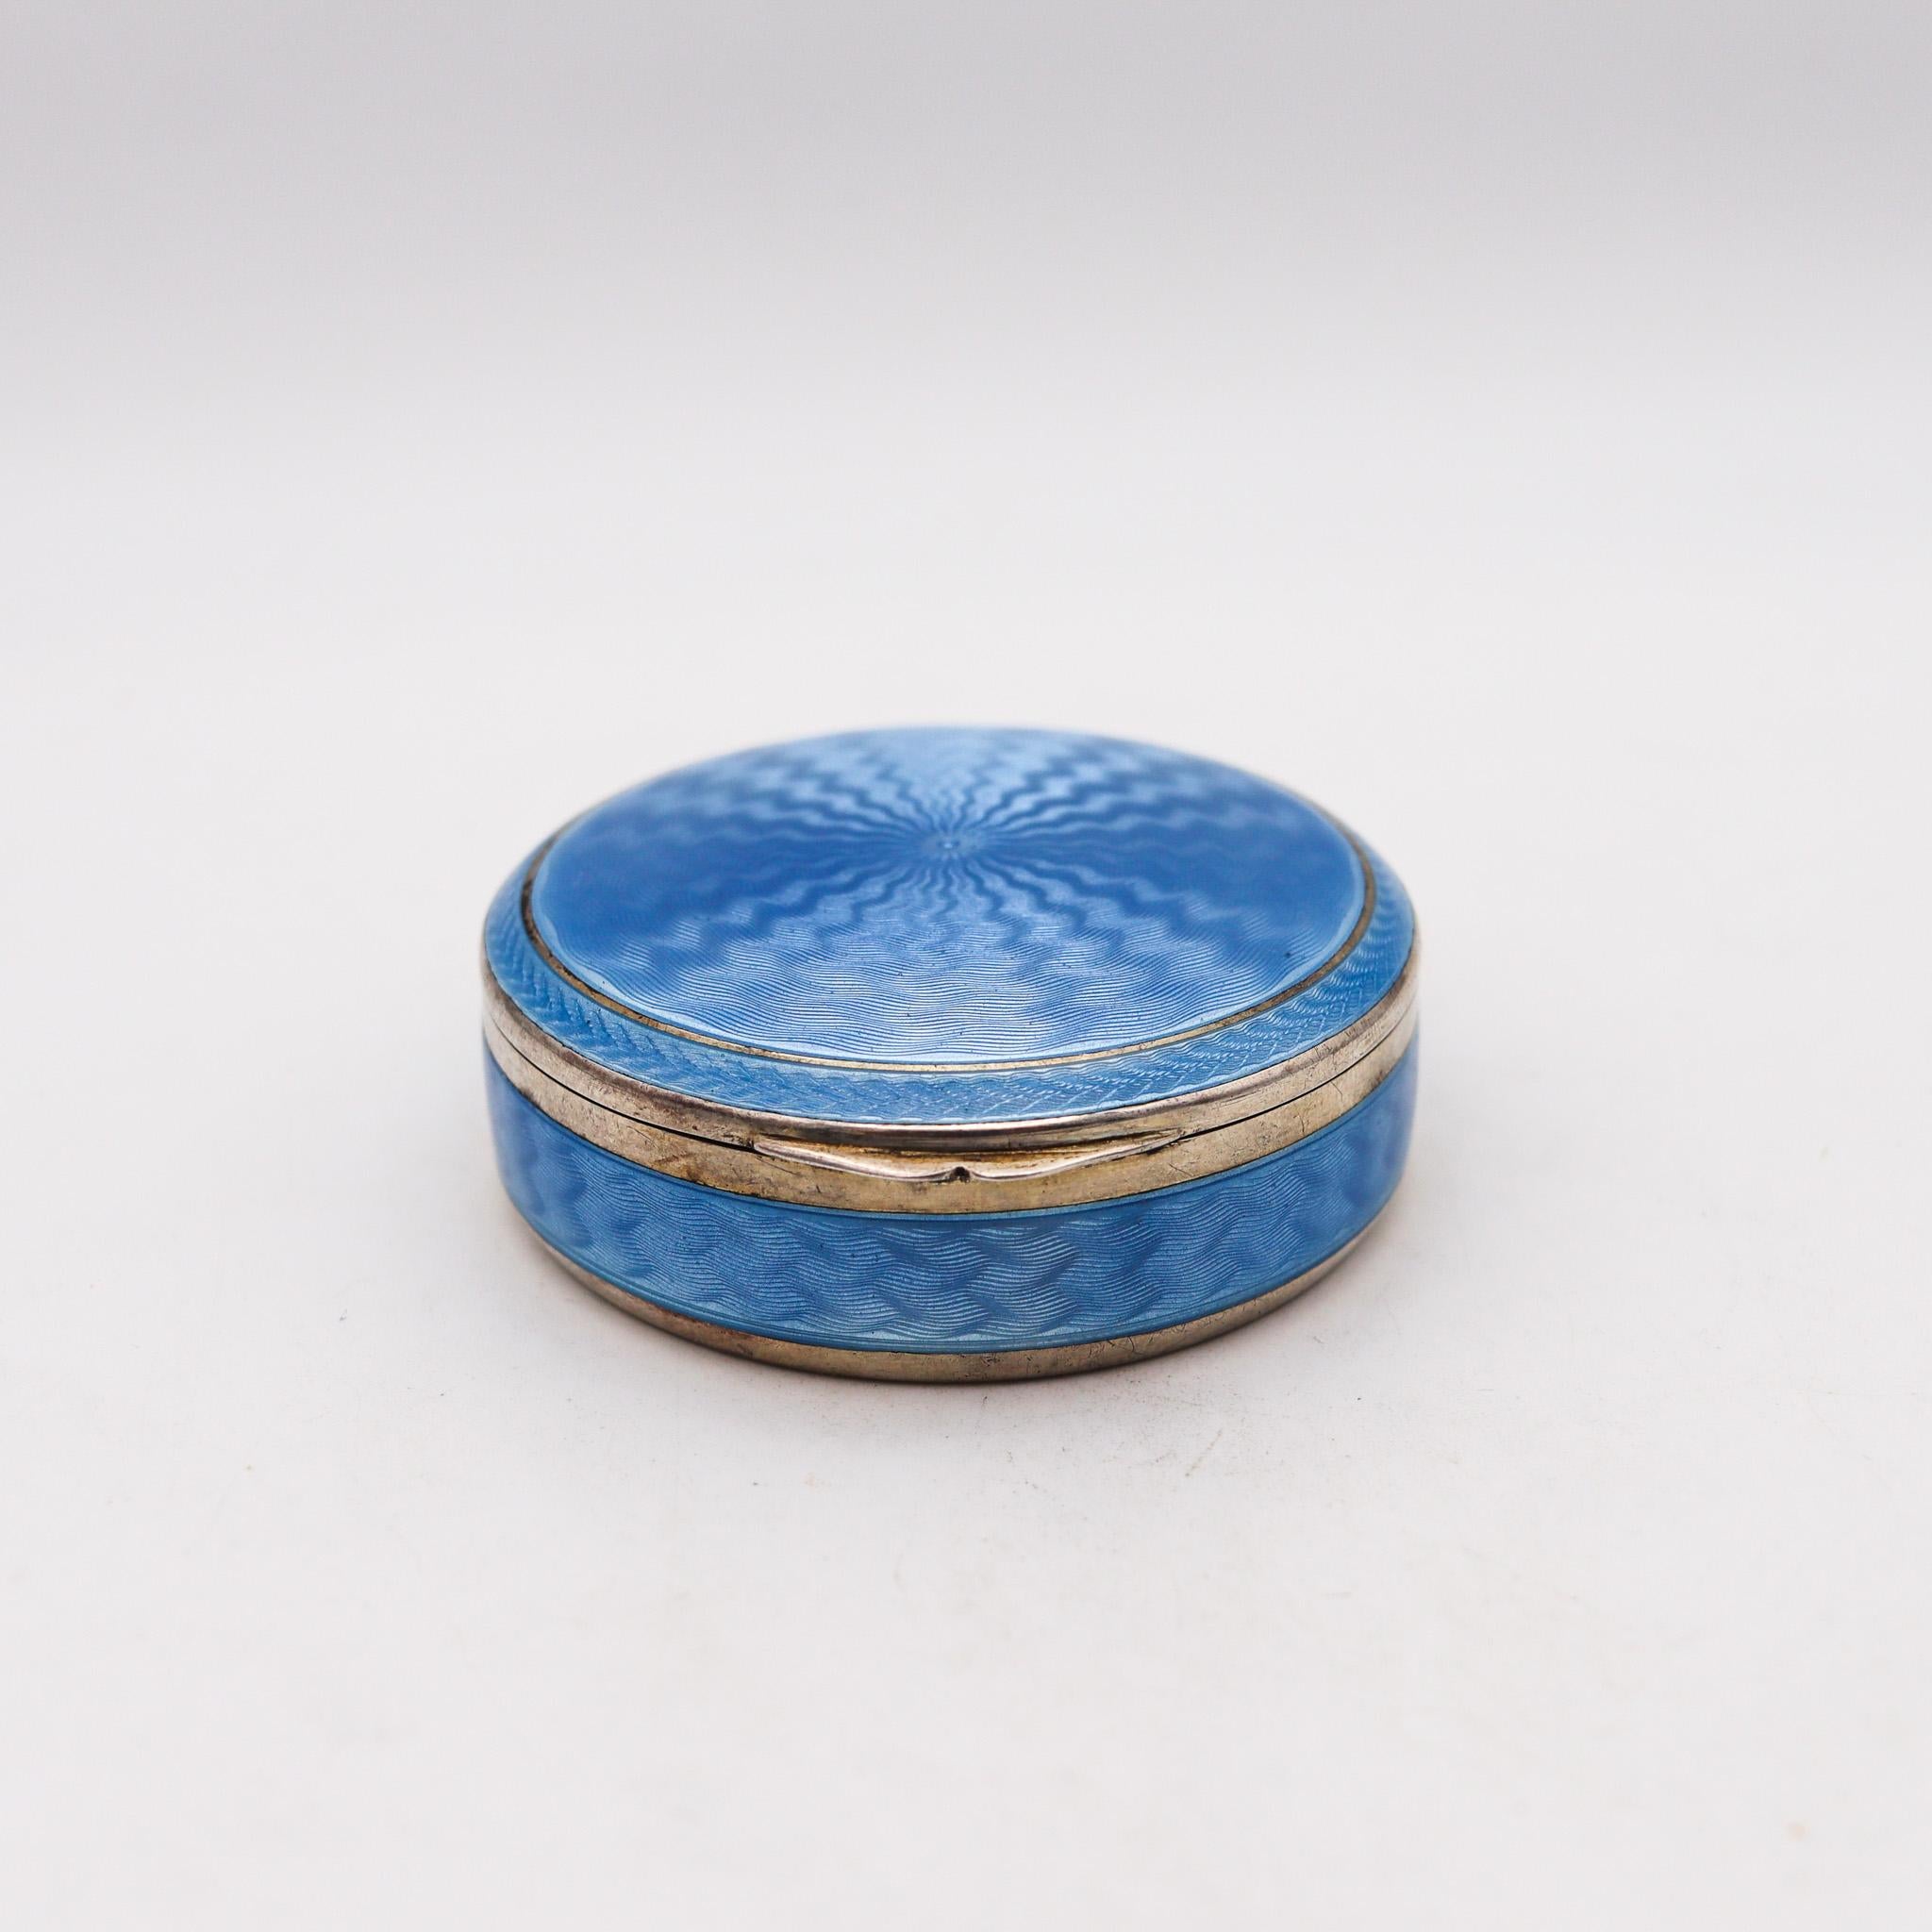 A guilloche enameled round box.

Fabulous German early 20th century enamel box, created in Pforzheim Germany, circa 1920. This beautiful box was carefully crafted at the workshop of E&W, with impeccable details in solid .935/.999 standard silver